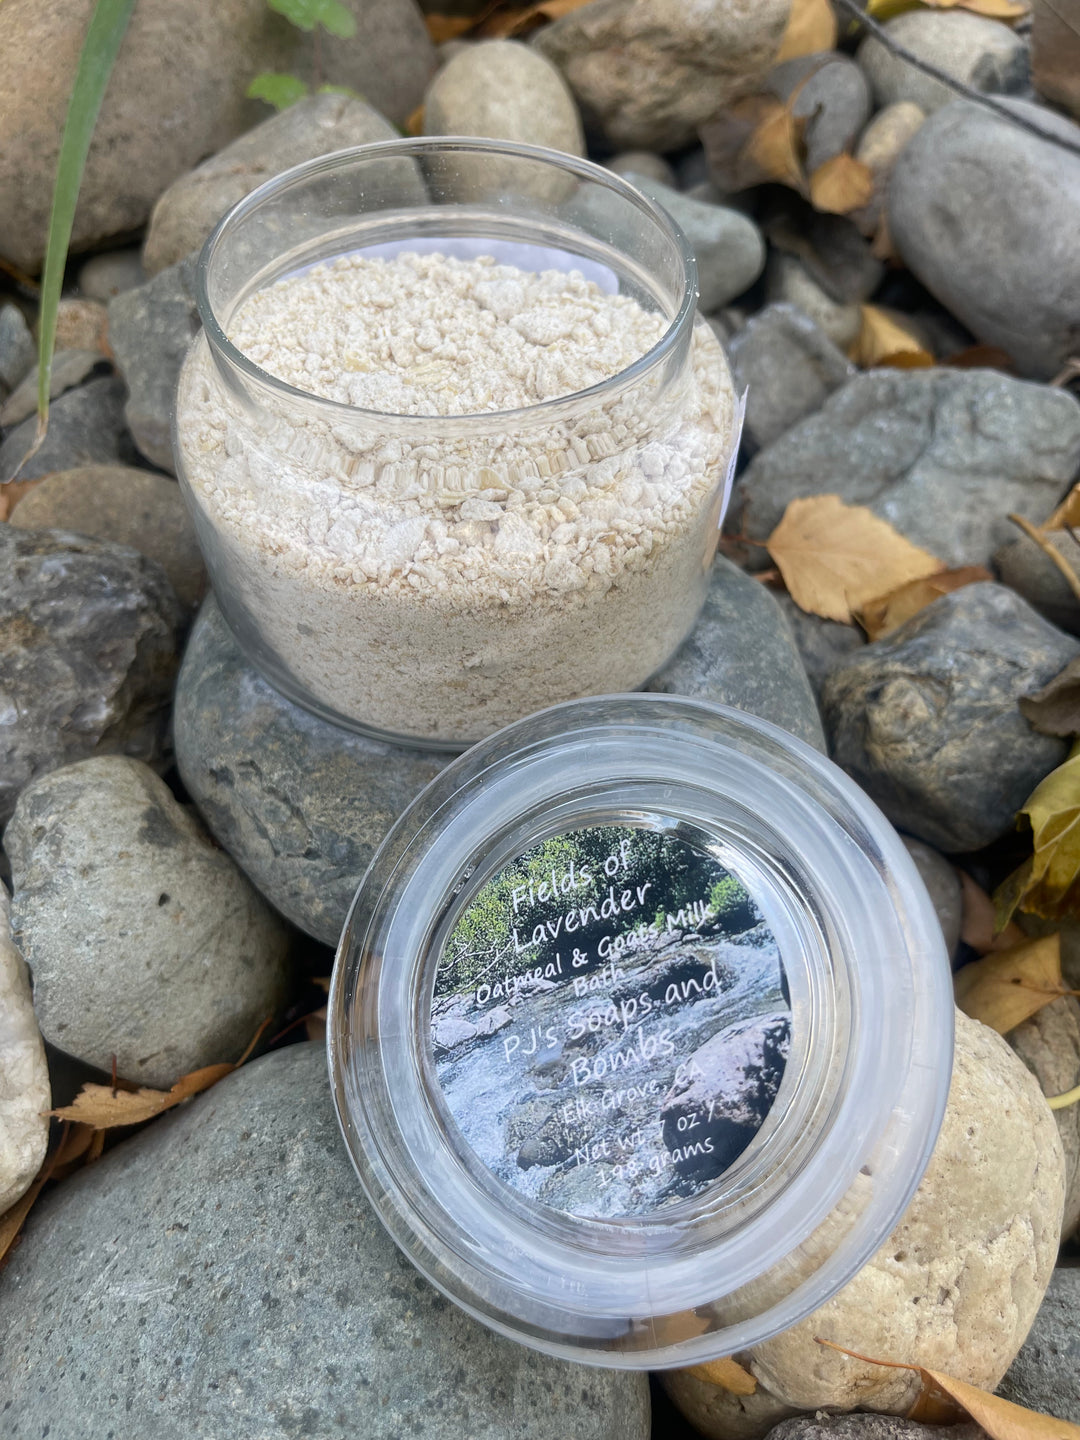 Comforting Goats Milk and Oatmeal Bath, Fields of Lavender Scent